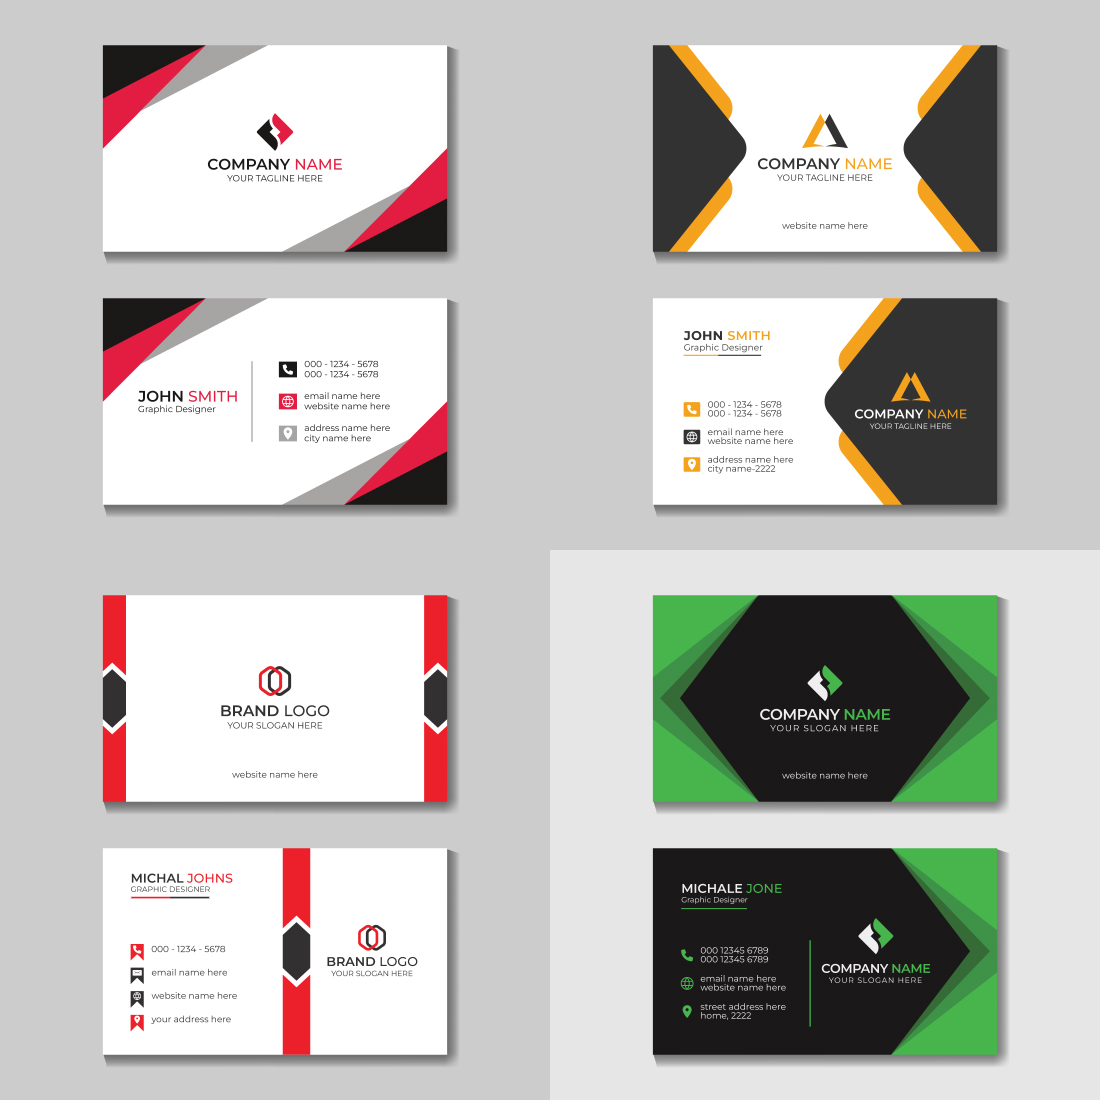 4 Corporate Modern Business Card Design Template All Styles Example.